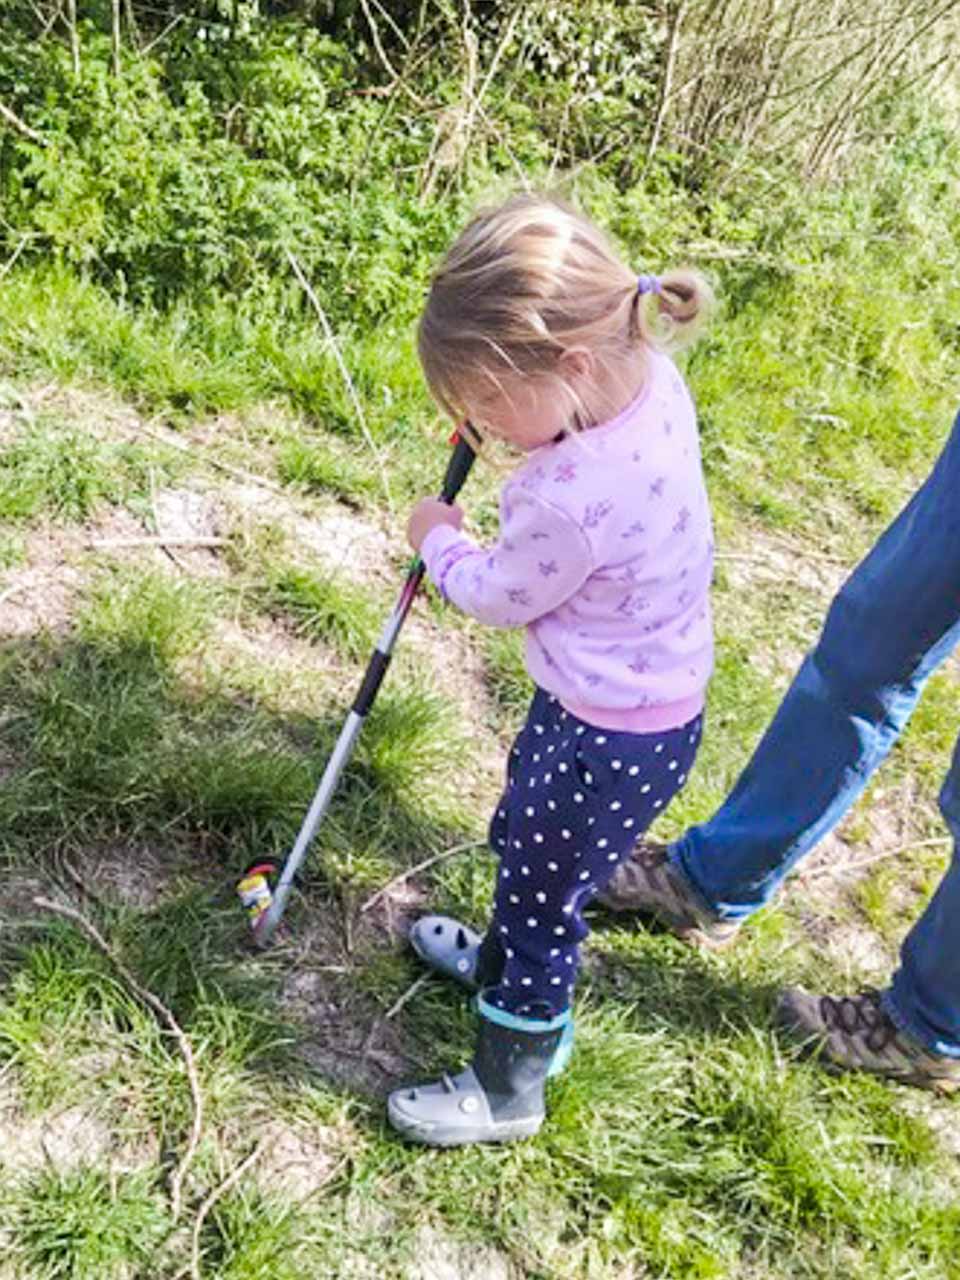 Litter pick 2022: Litter pickers start young and quickly understand the nuisance of litter